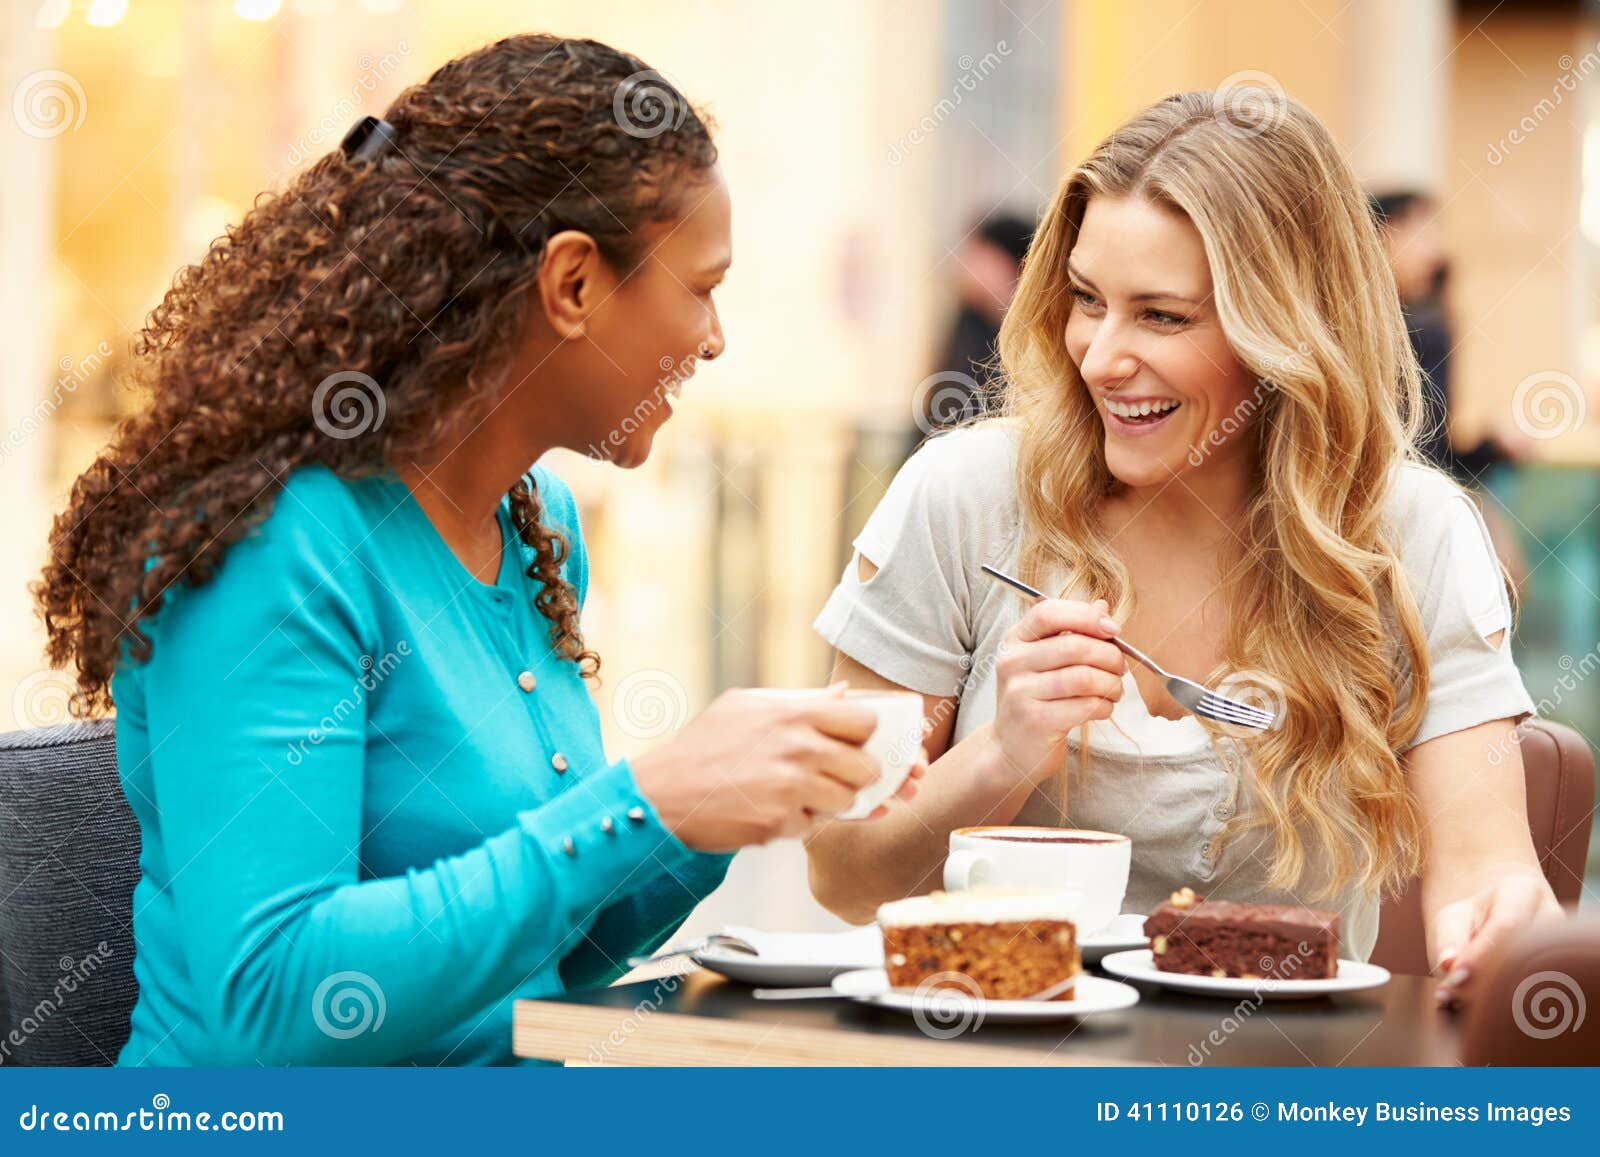 two female friends meeting in cafe